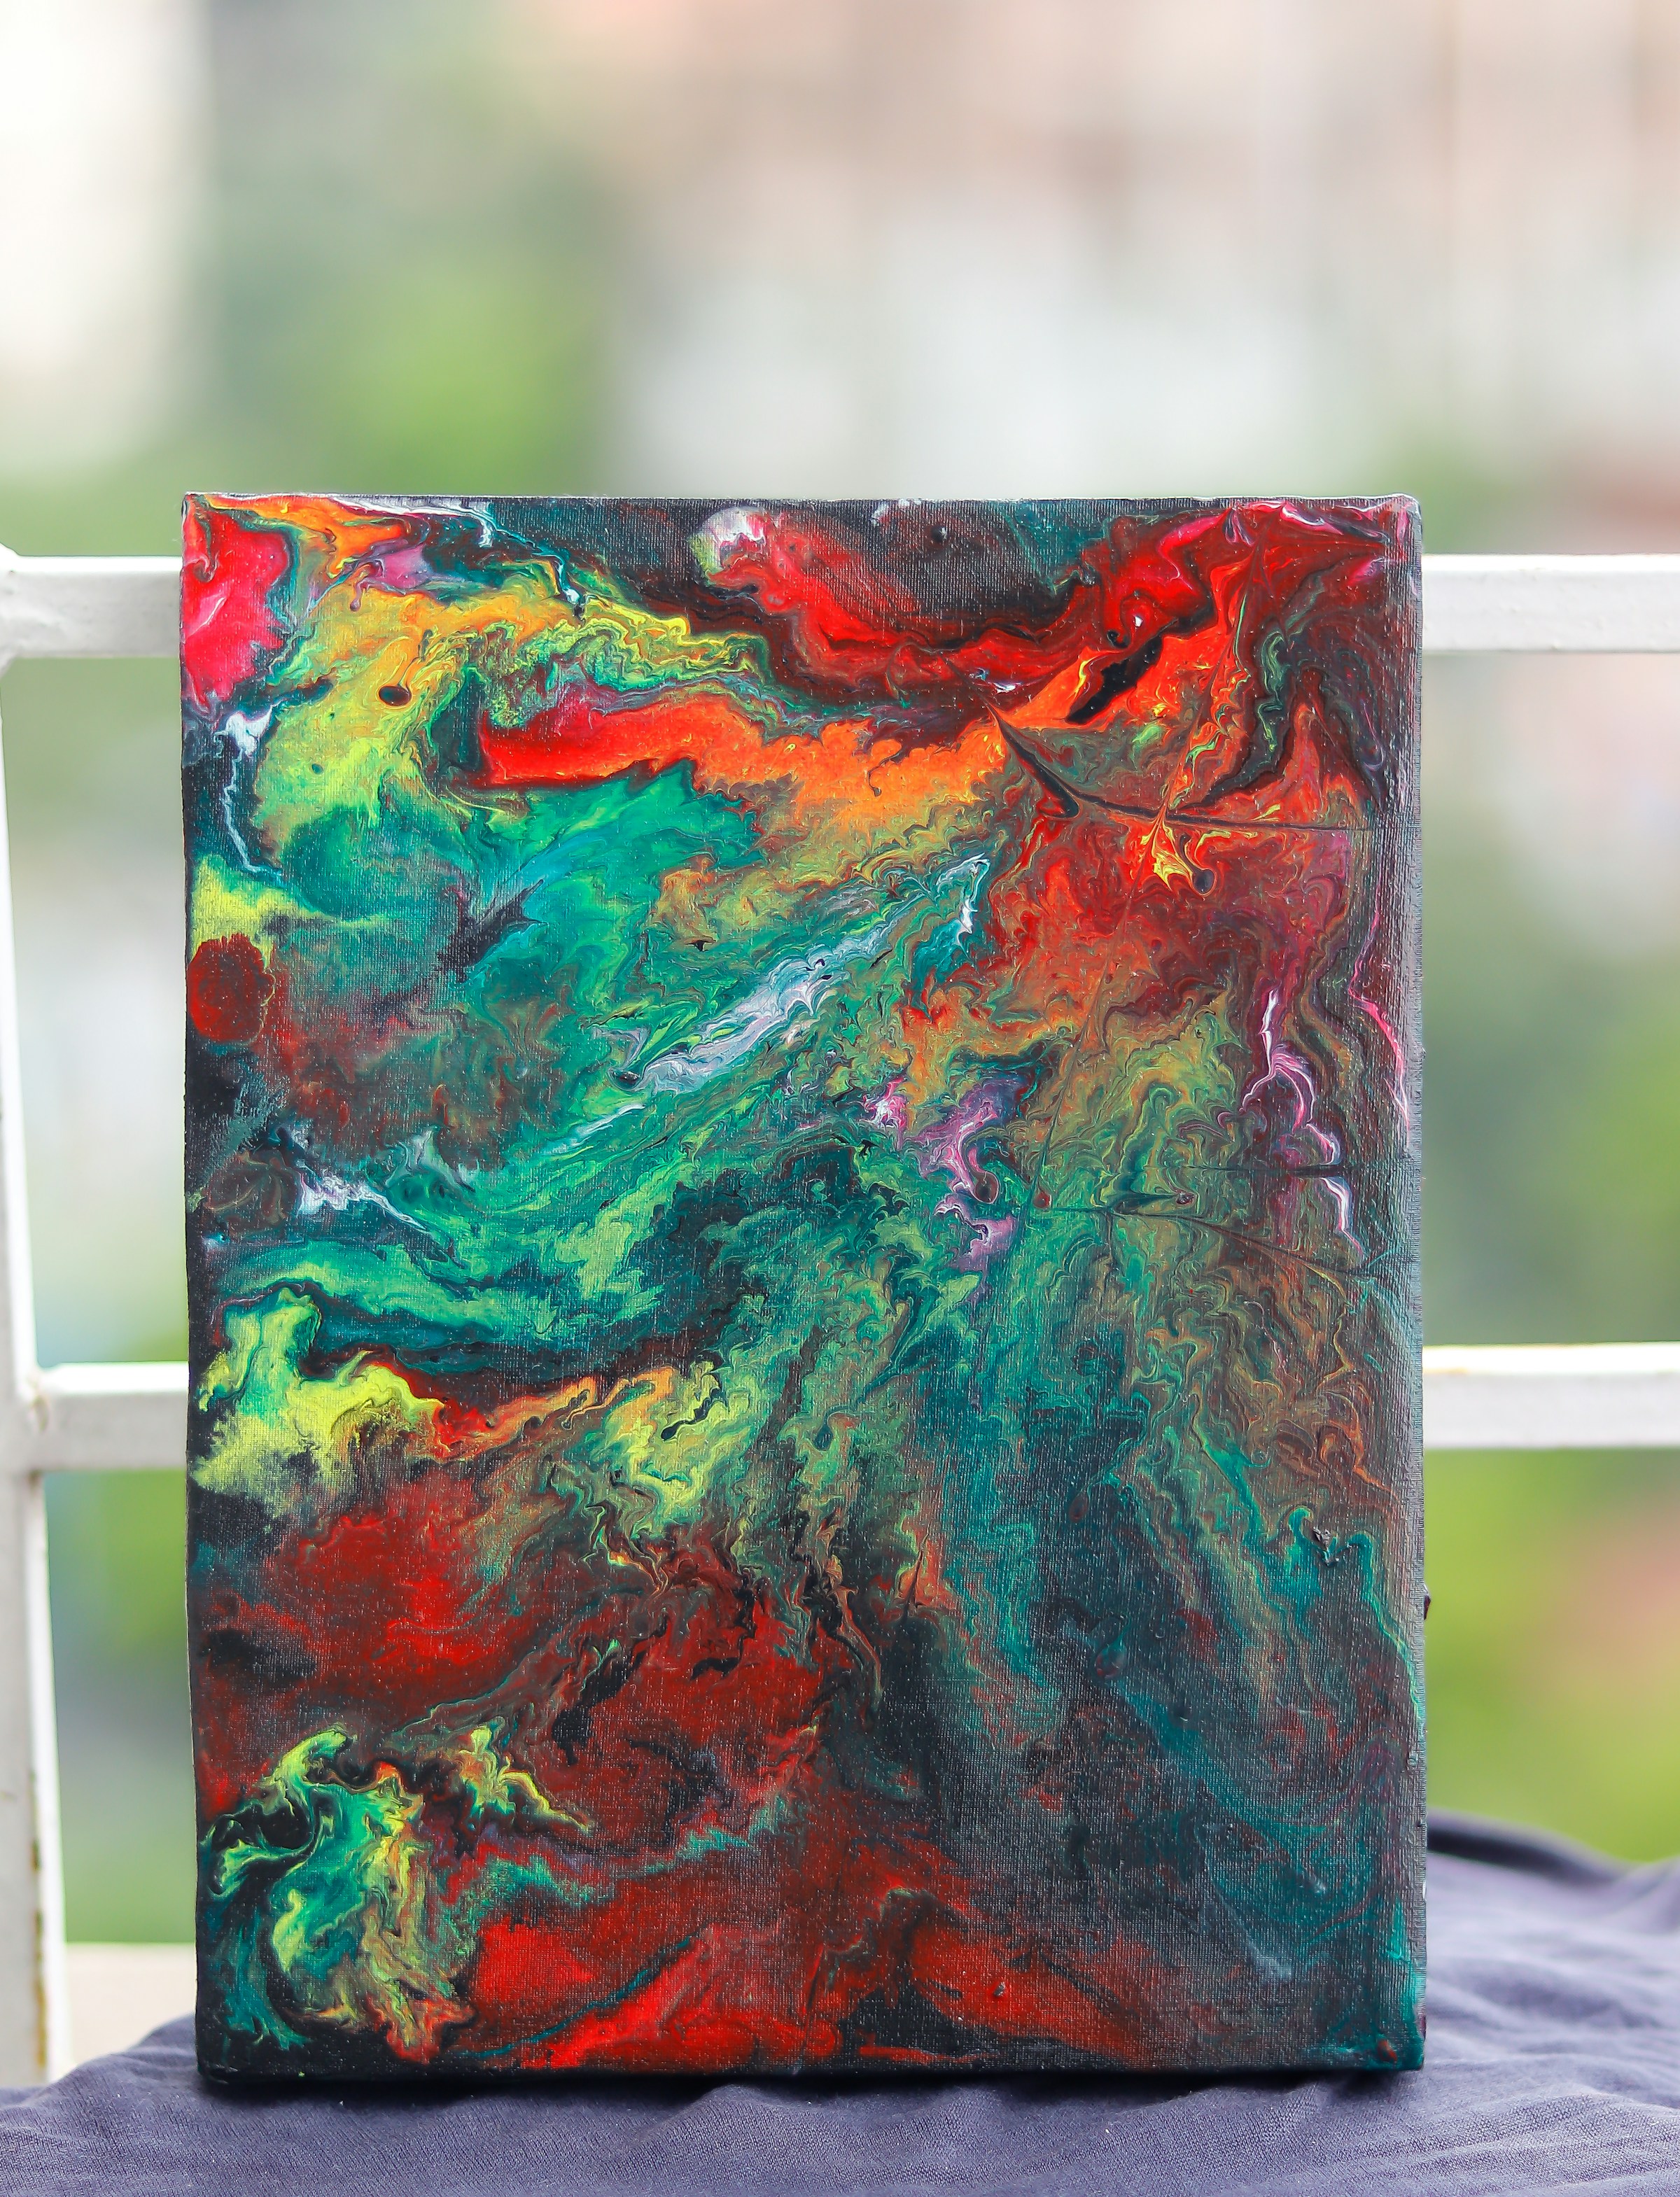 An abstract painting on canvas | Source: Unsplash